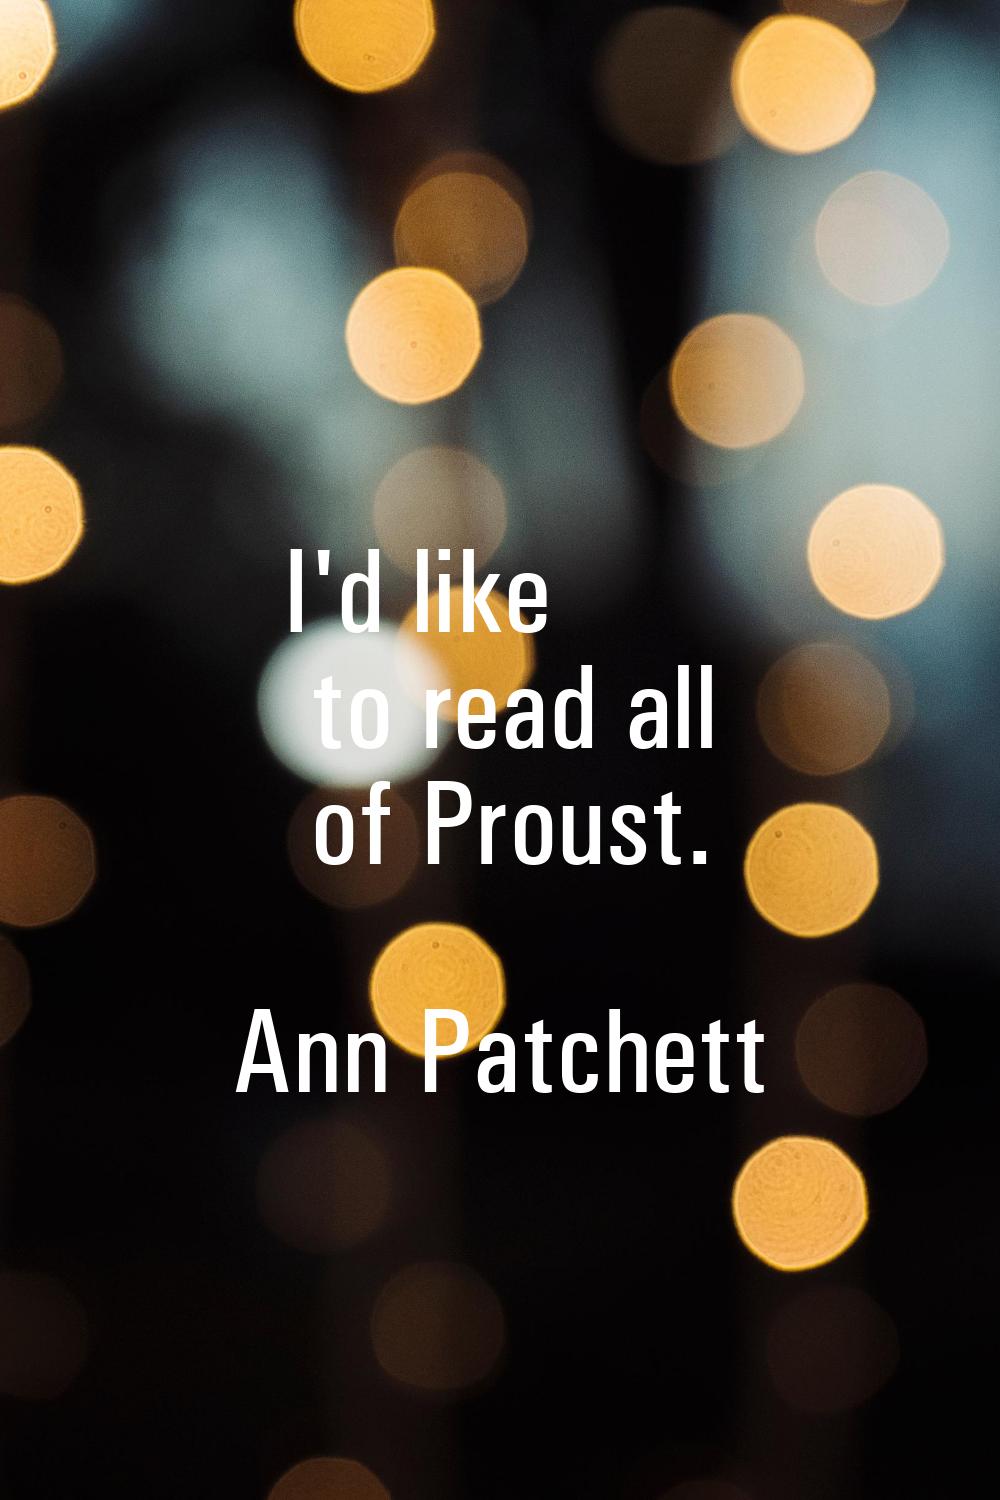 I'd like to read all of Proust.